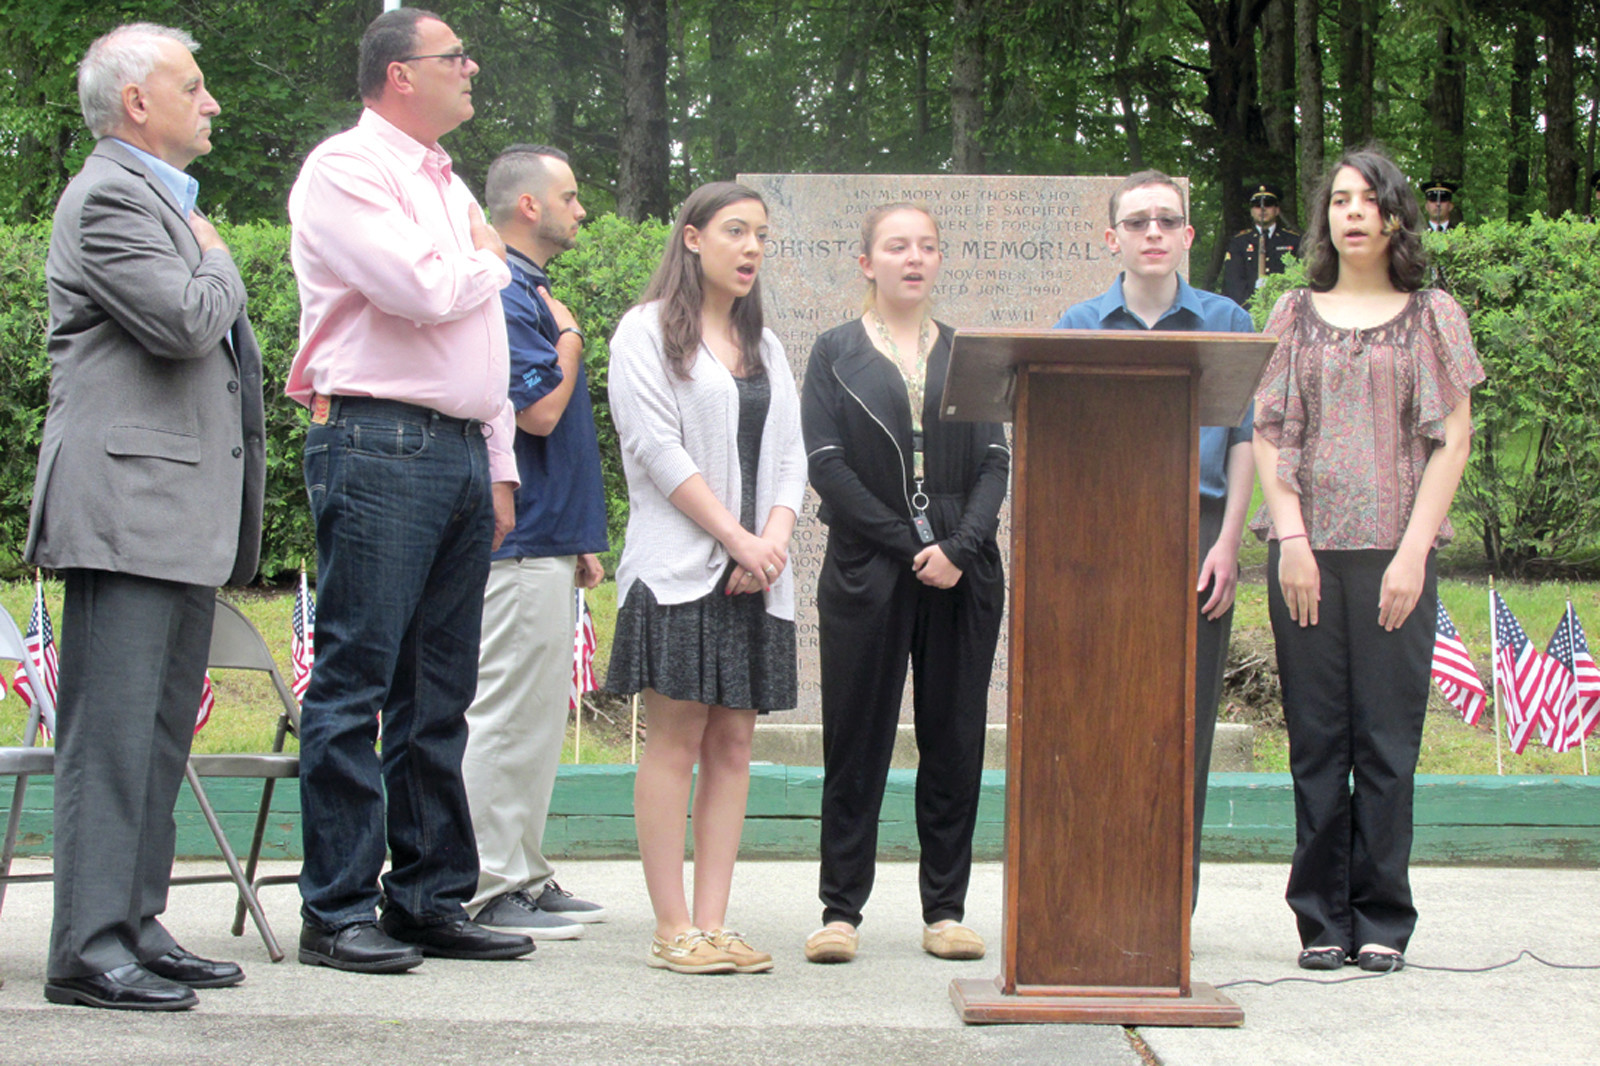 MEMORIAL MOMENT: Johnston Mayor Joseph Polisena (left), Parks & Recreation Director Dan Mazzulla and emcee Mike Bedrosian stand at attention as Johnston High chorus members Isabella Parrillo, Madison Paolucci, Matthew Eisemann and Kathleen Jaroma sing the national anthem during Saturday’s annual Memorial Day service.